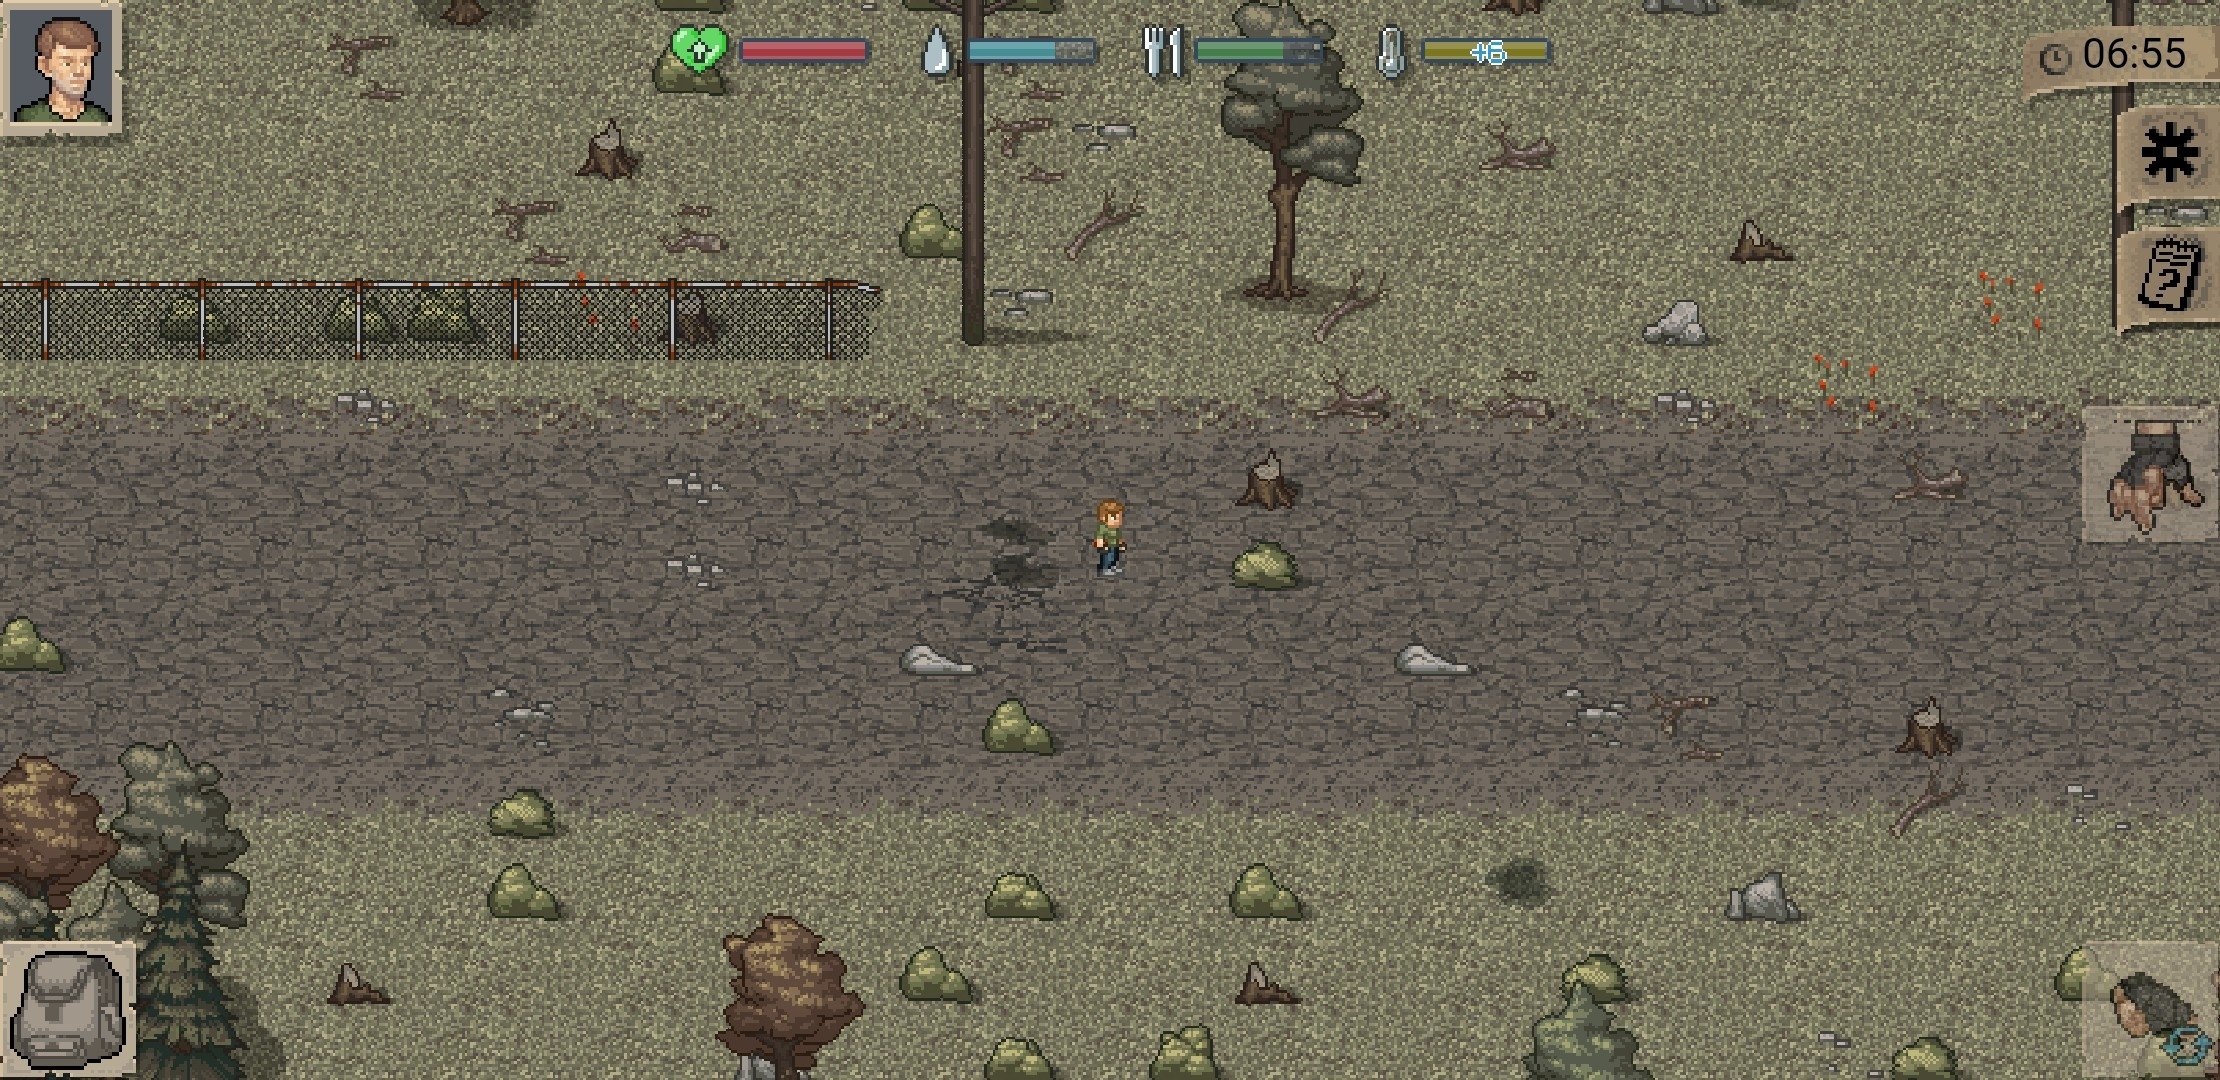 Mini DAYZ survival game now available on Android mobile devices